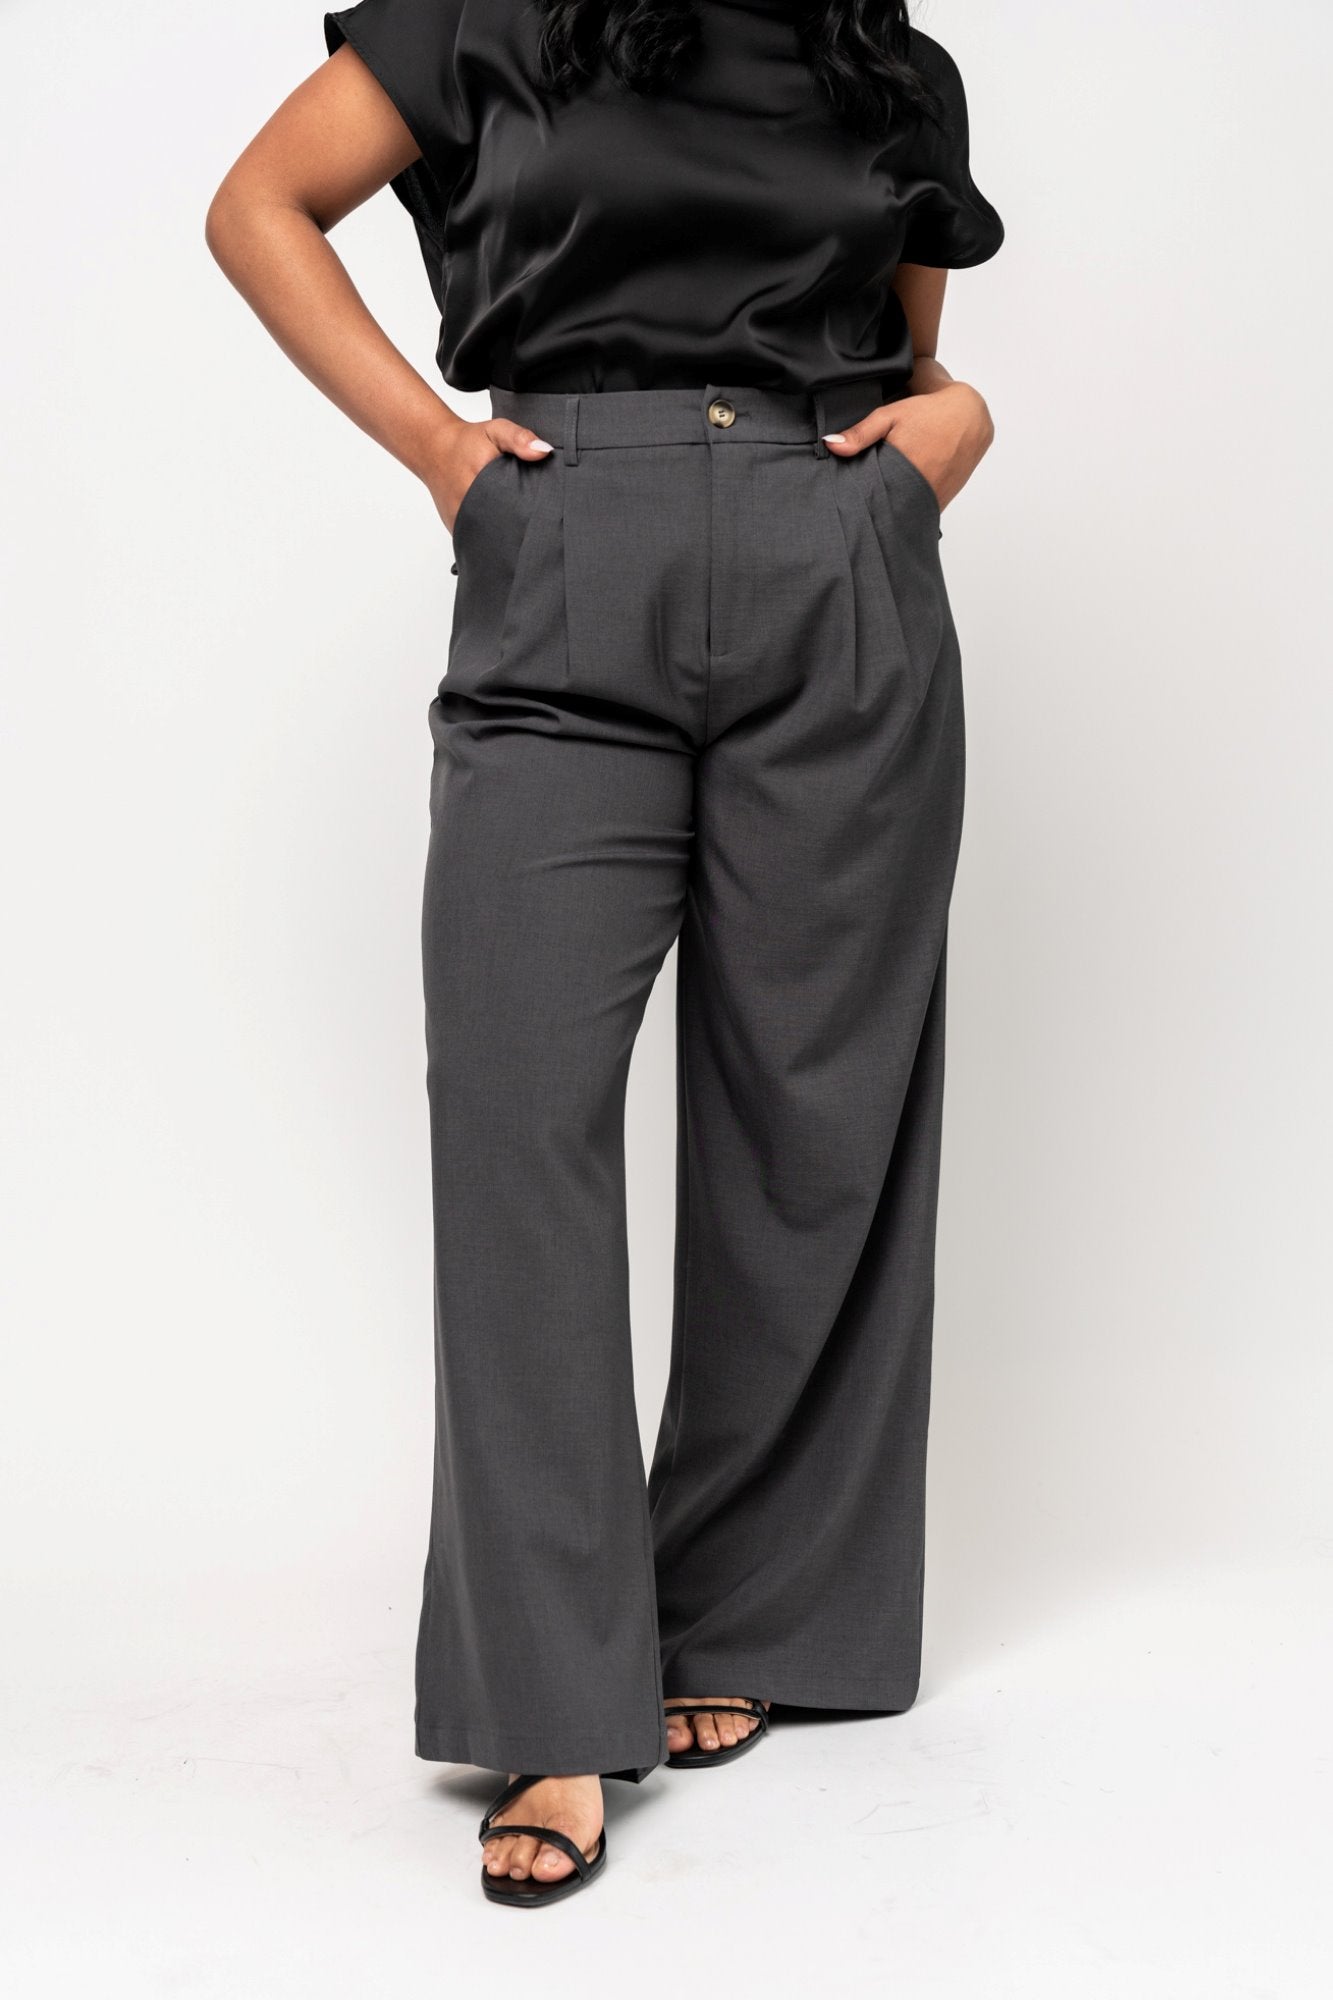 Jaxs Pant in Charcoal Holley Girl 